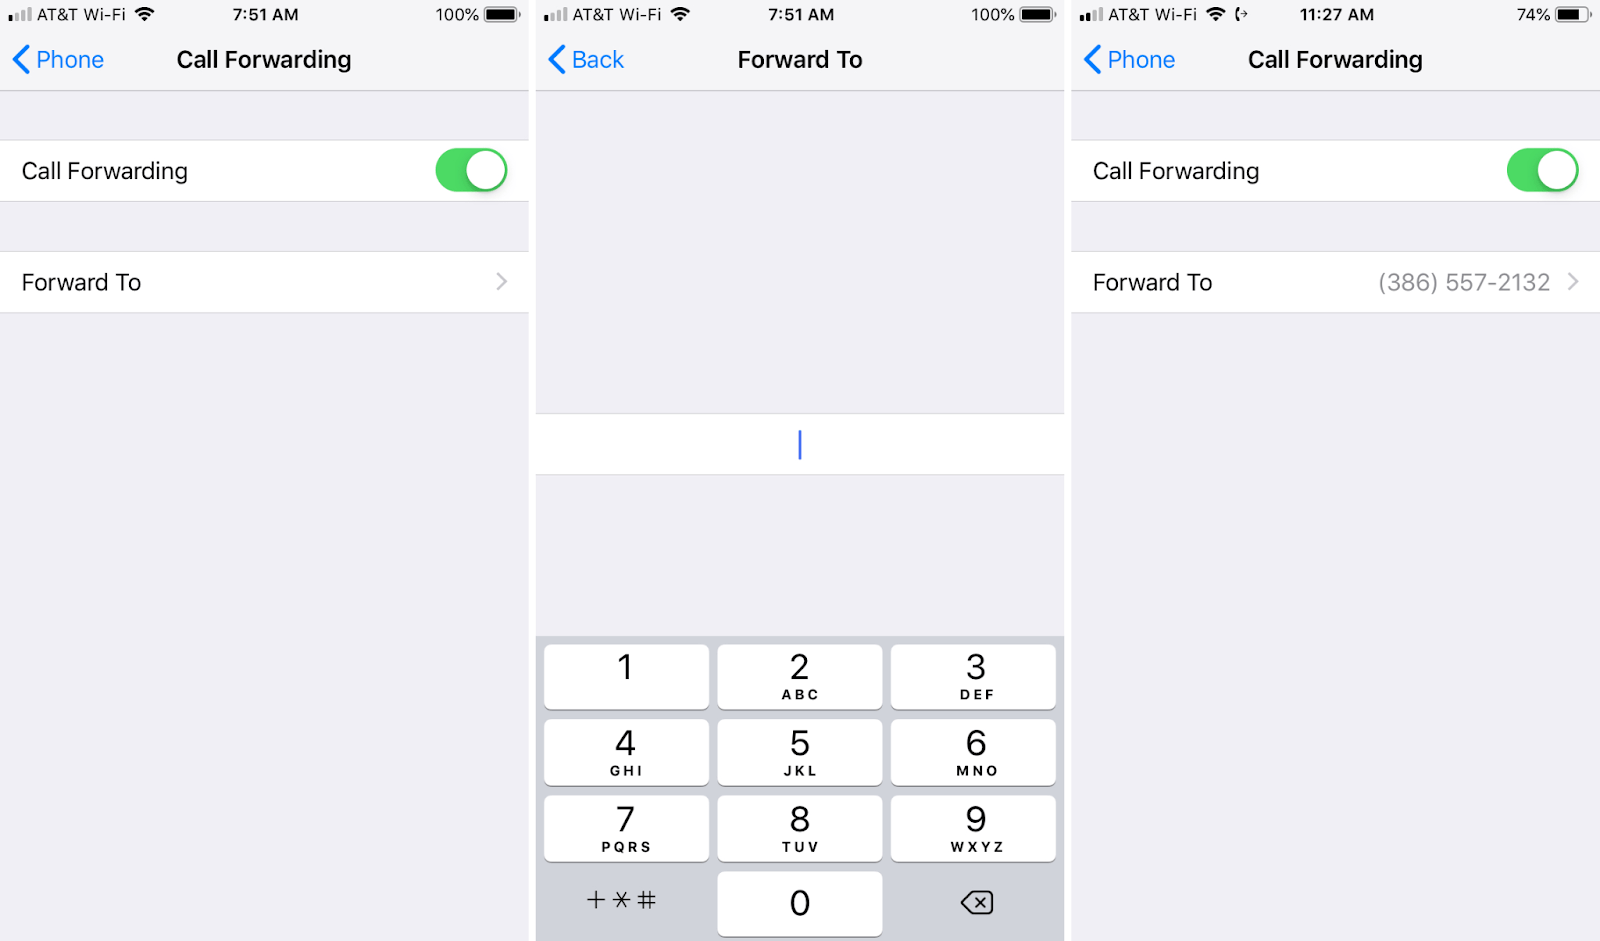  Setting call forwarding function on iOS devices